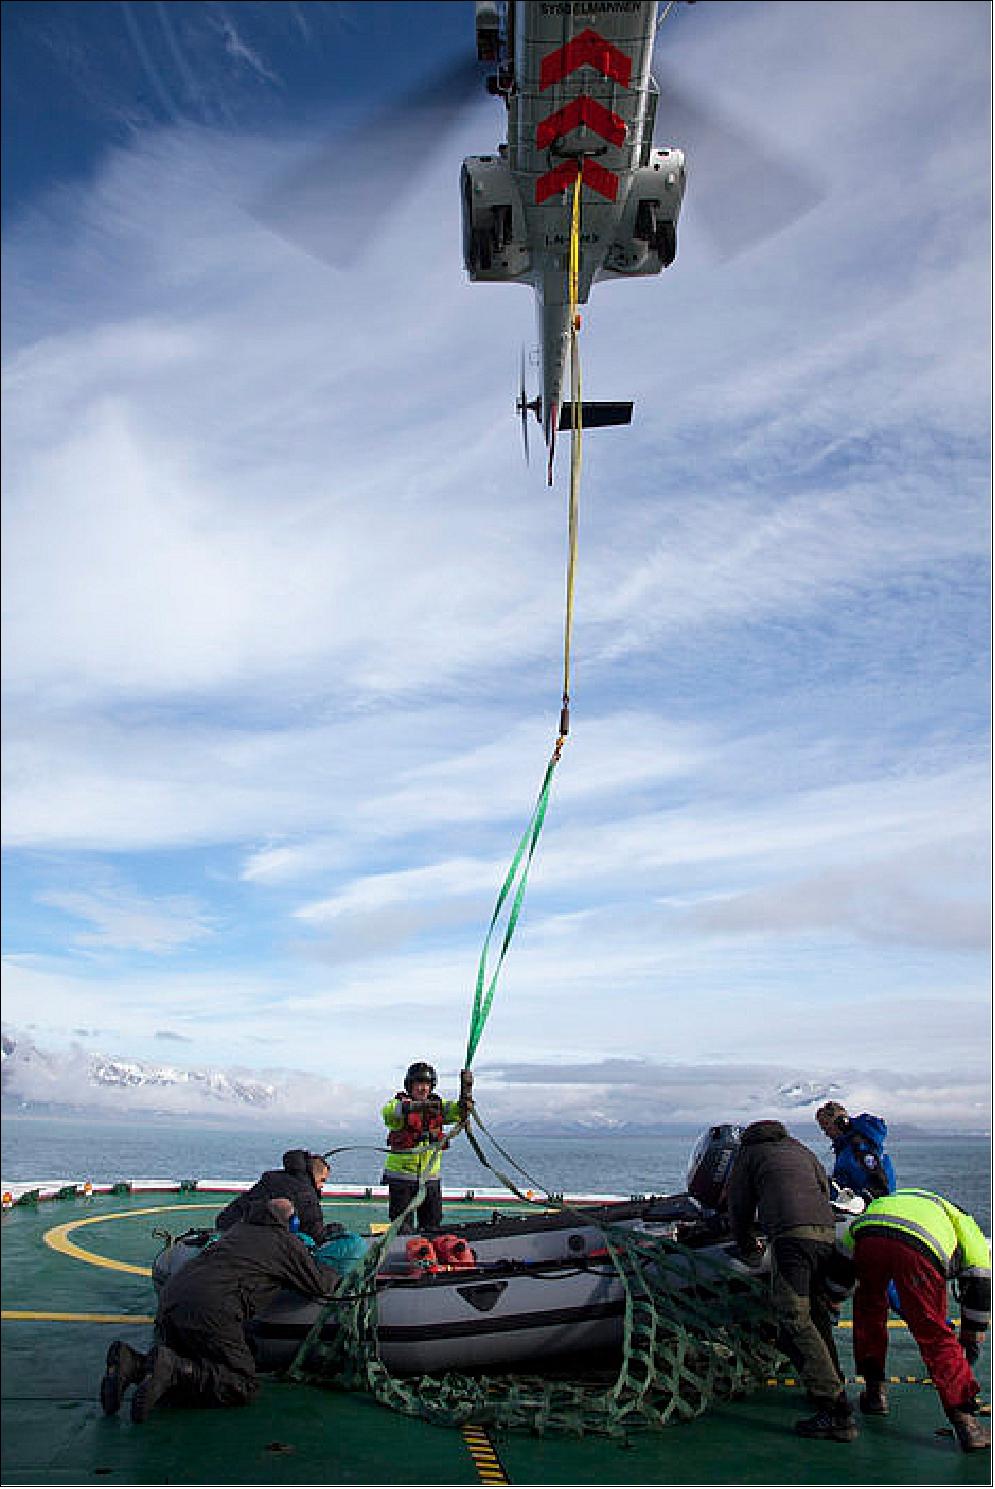 Figure 100: A helicopter airlift during a Norwegian search and rescue exercise on the Svalbard archipelago (image credit: Sysselmannen på Svalbard–Birgit Adelheid Suhr) 129)